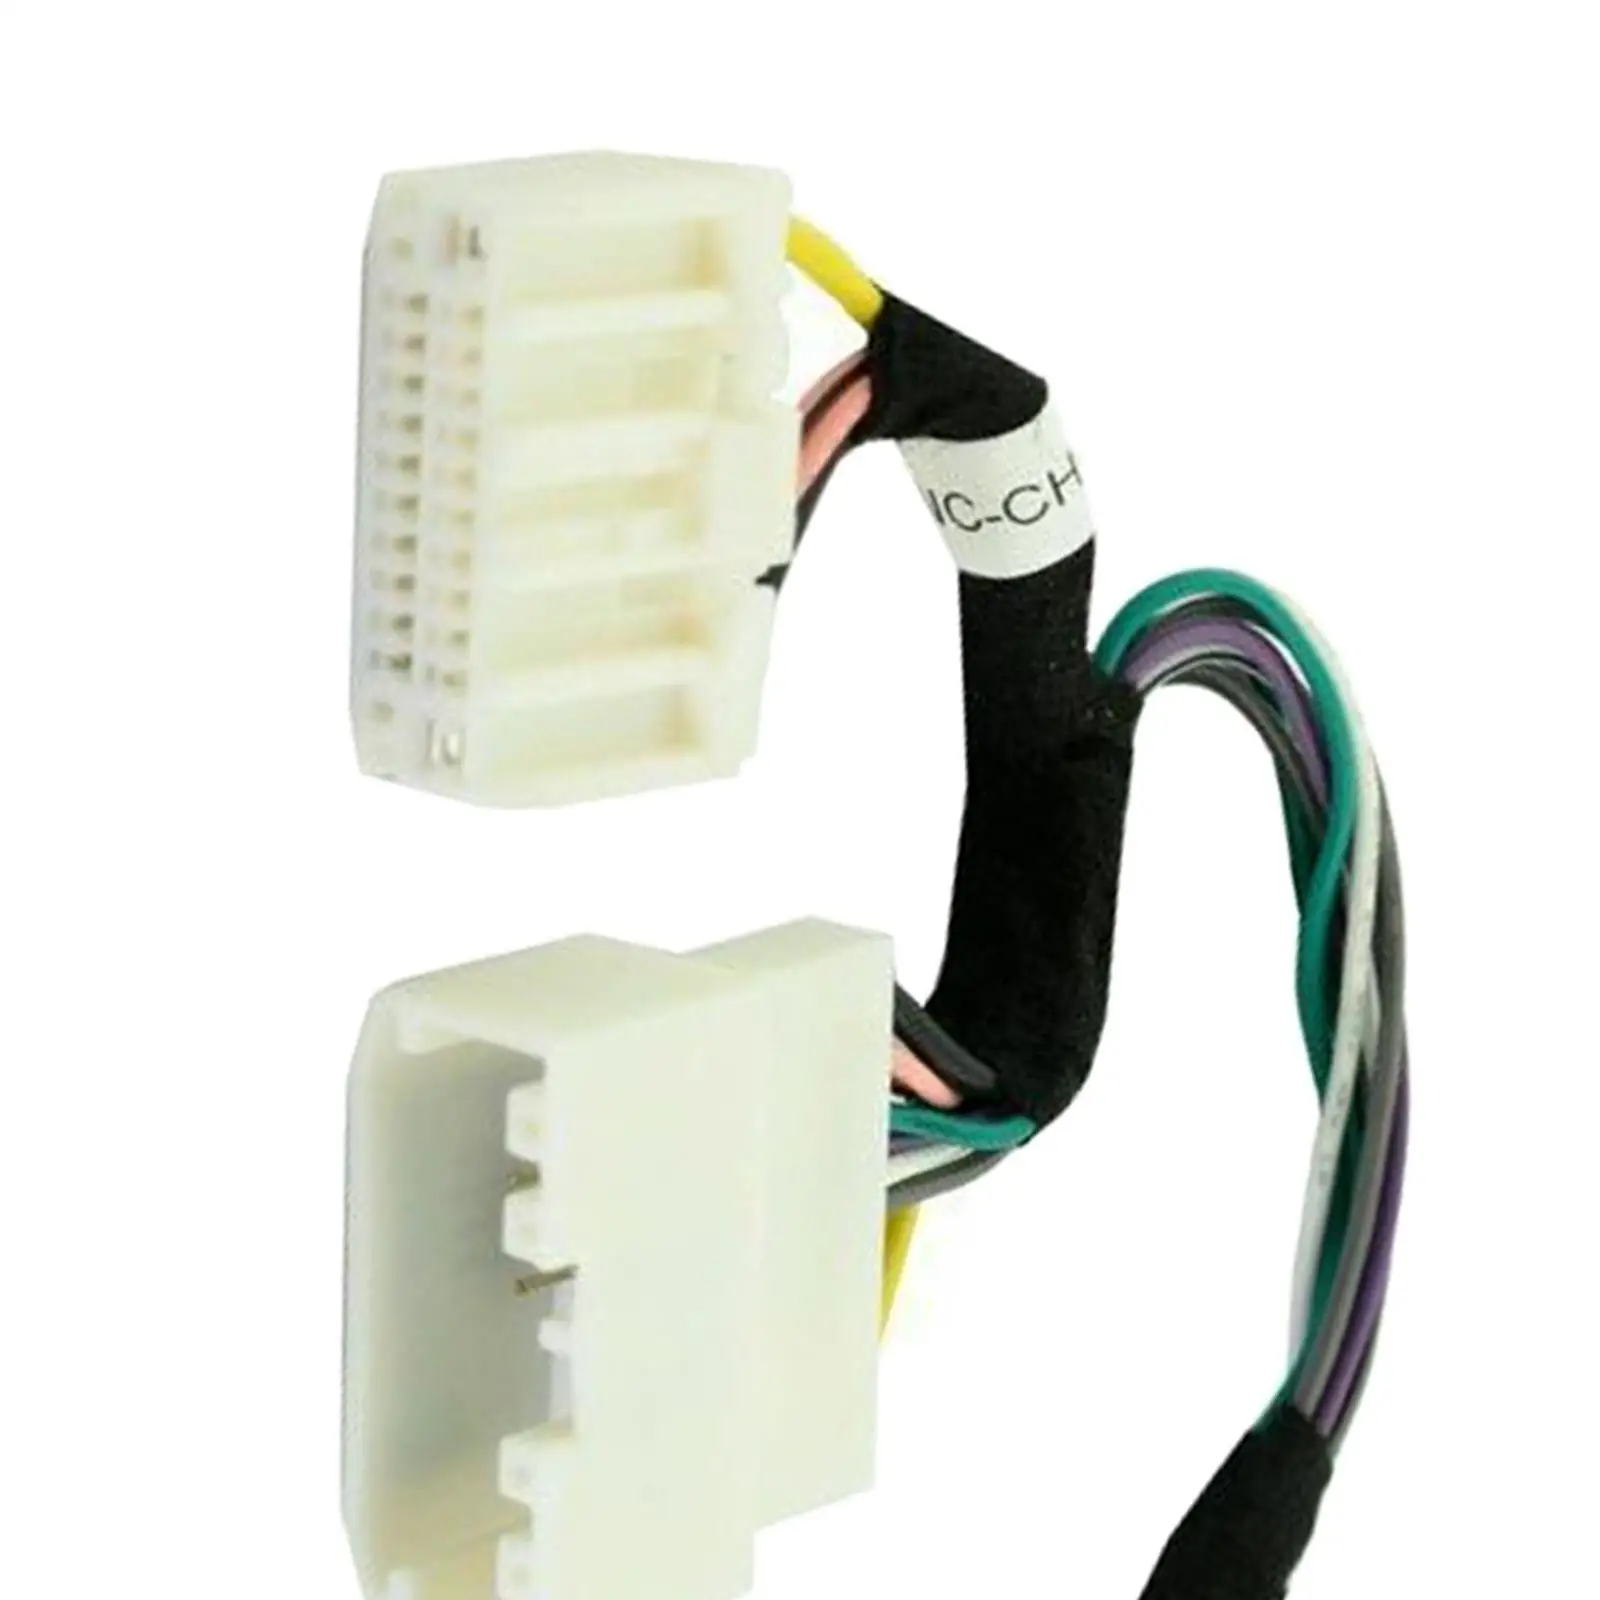 Anc-Ch01 Replaces ANC Module Bypass Harness for Chrysler, Jeep, RAM